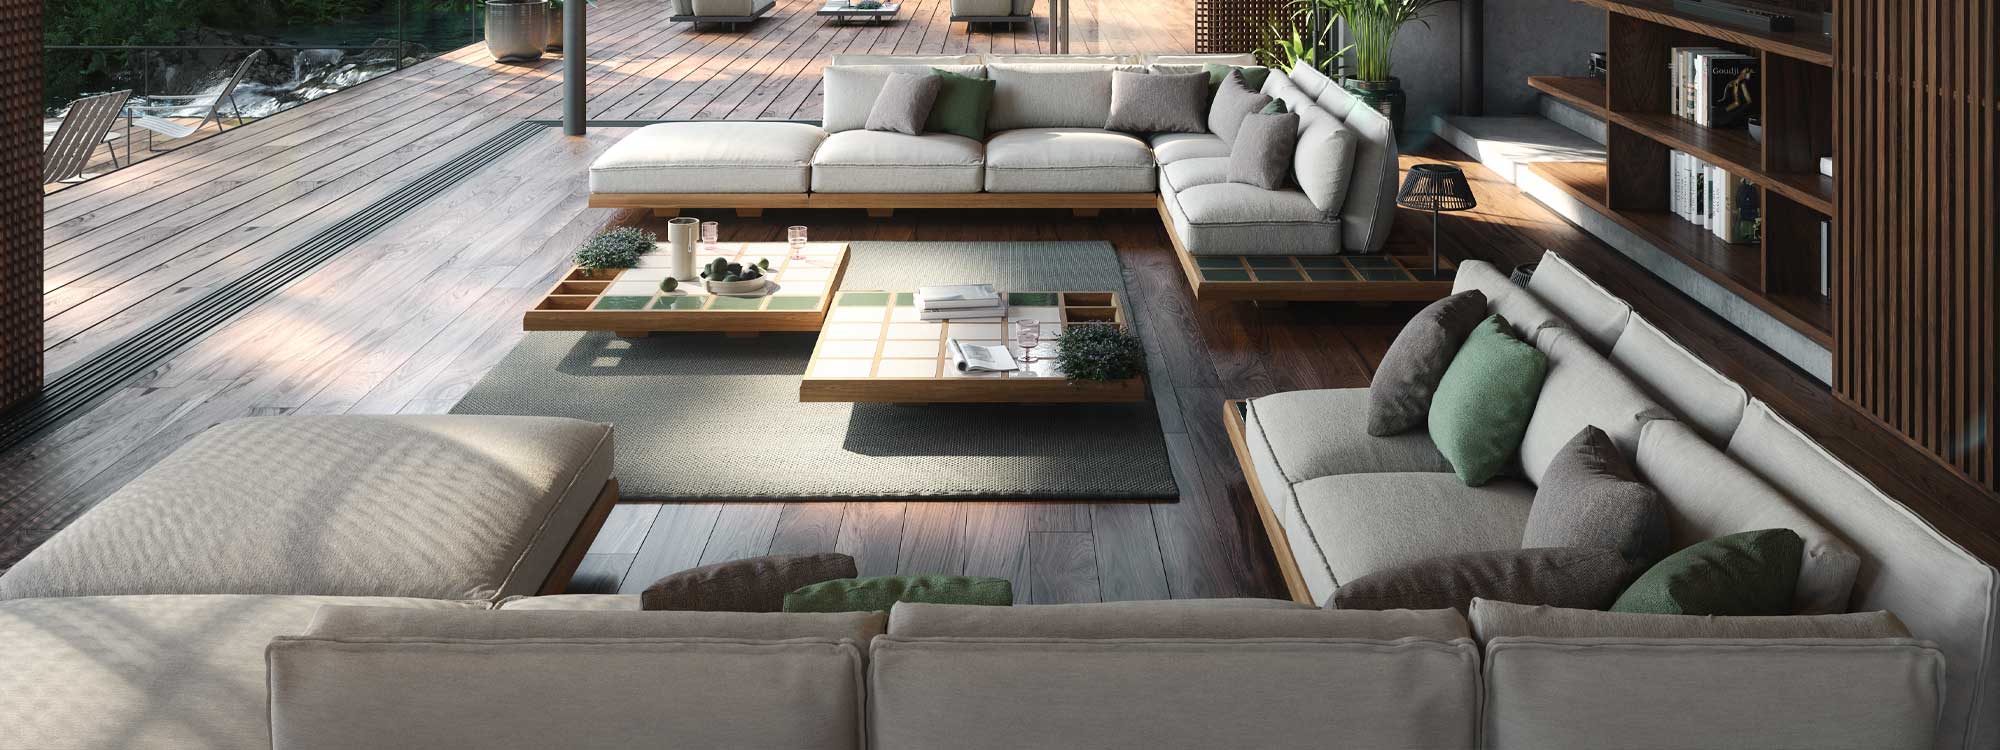 Image of pair of Mozaix luxury wooden corner sofas by Royal Botania in garden room overlooking expansive wooden decking